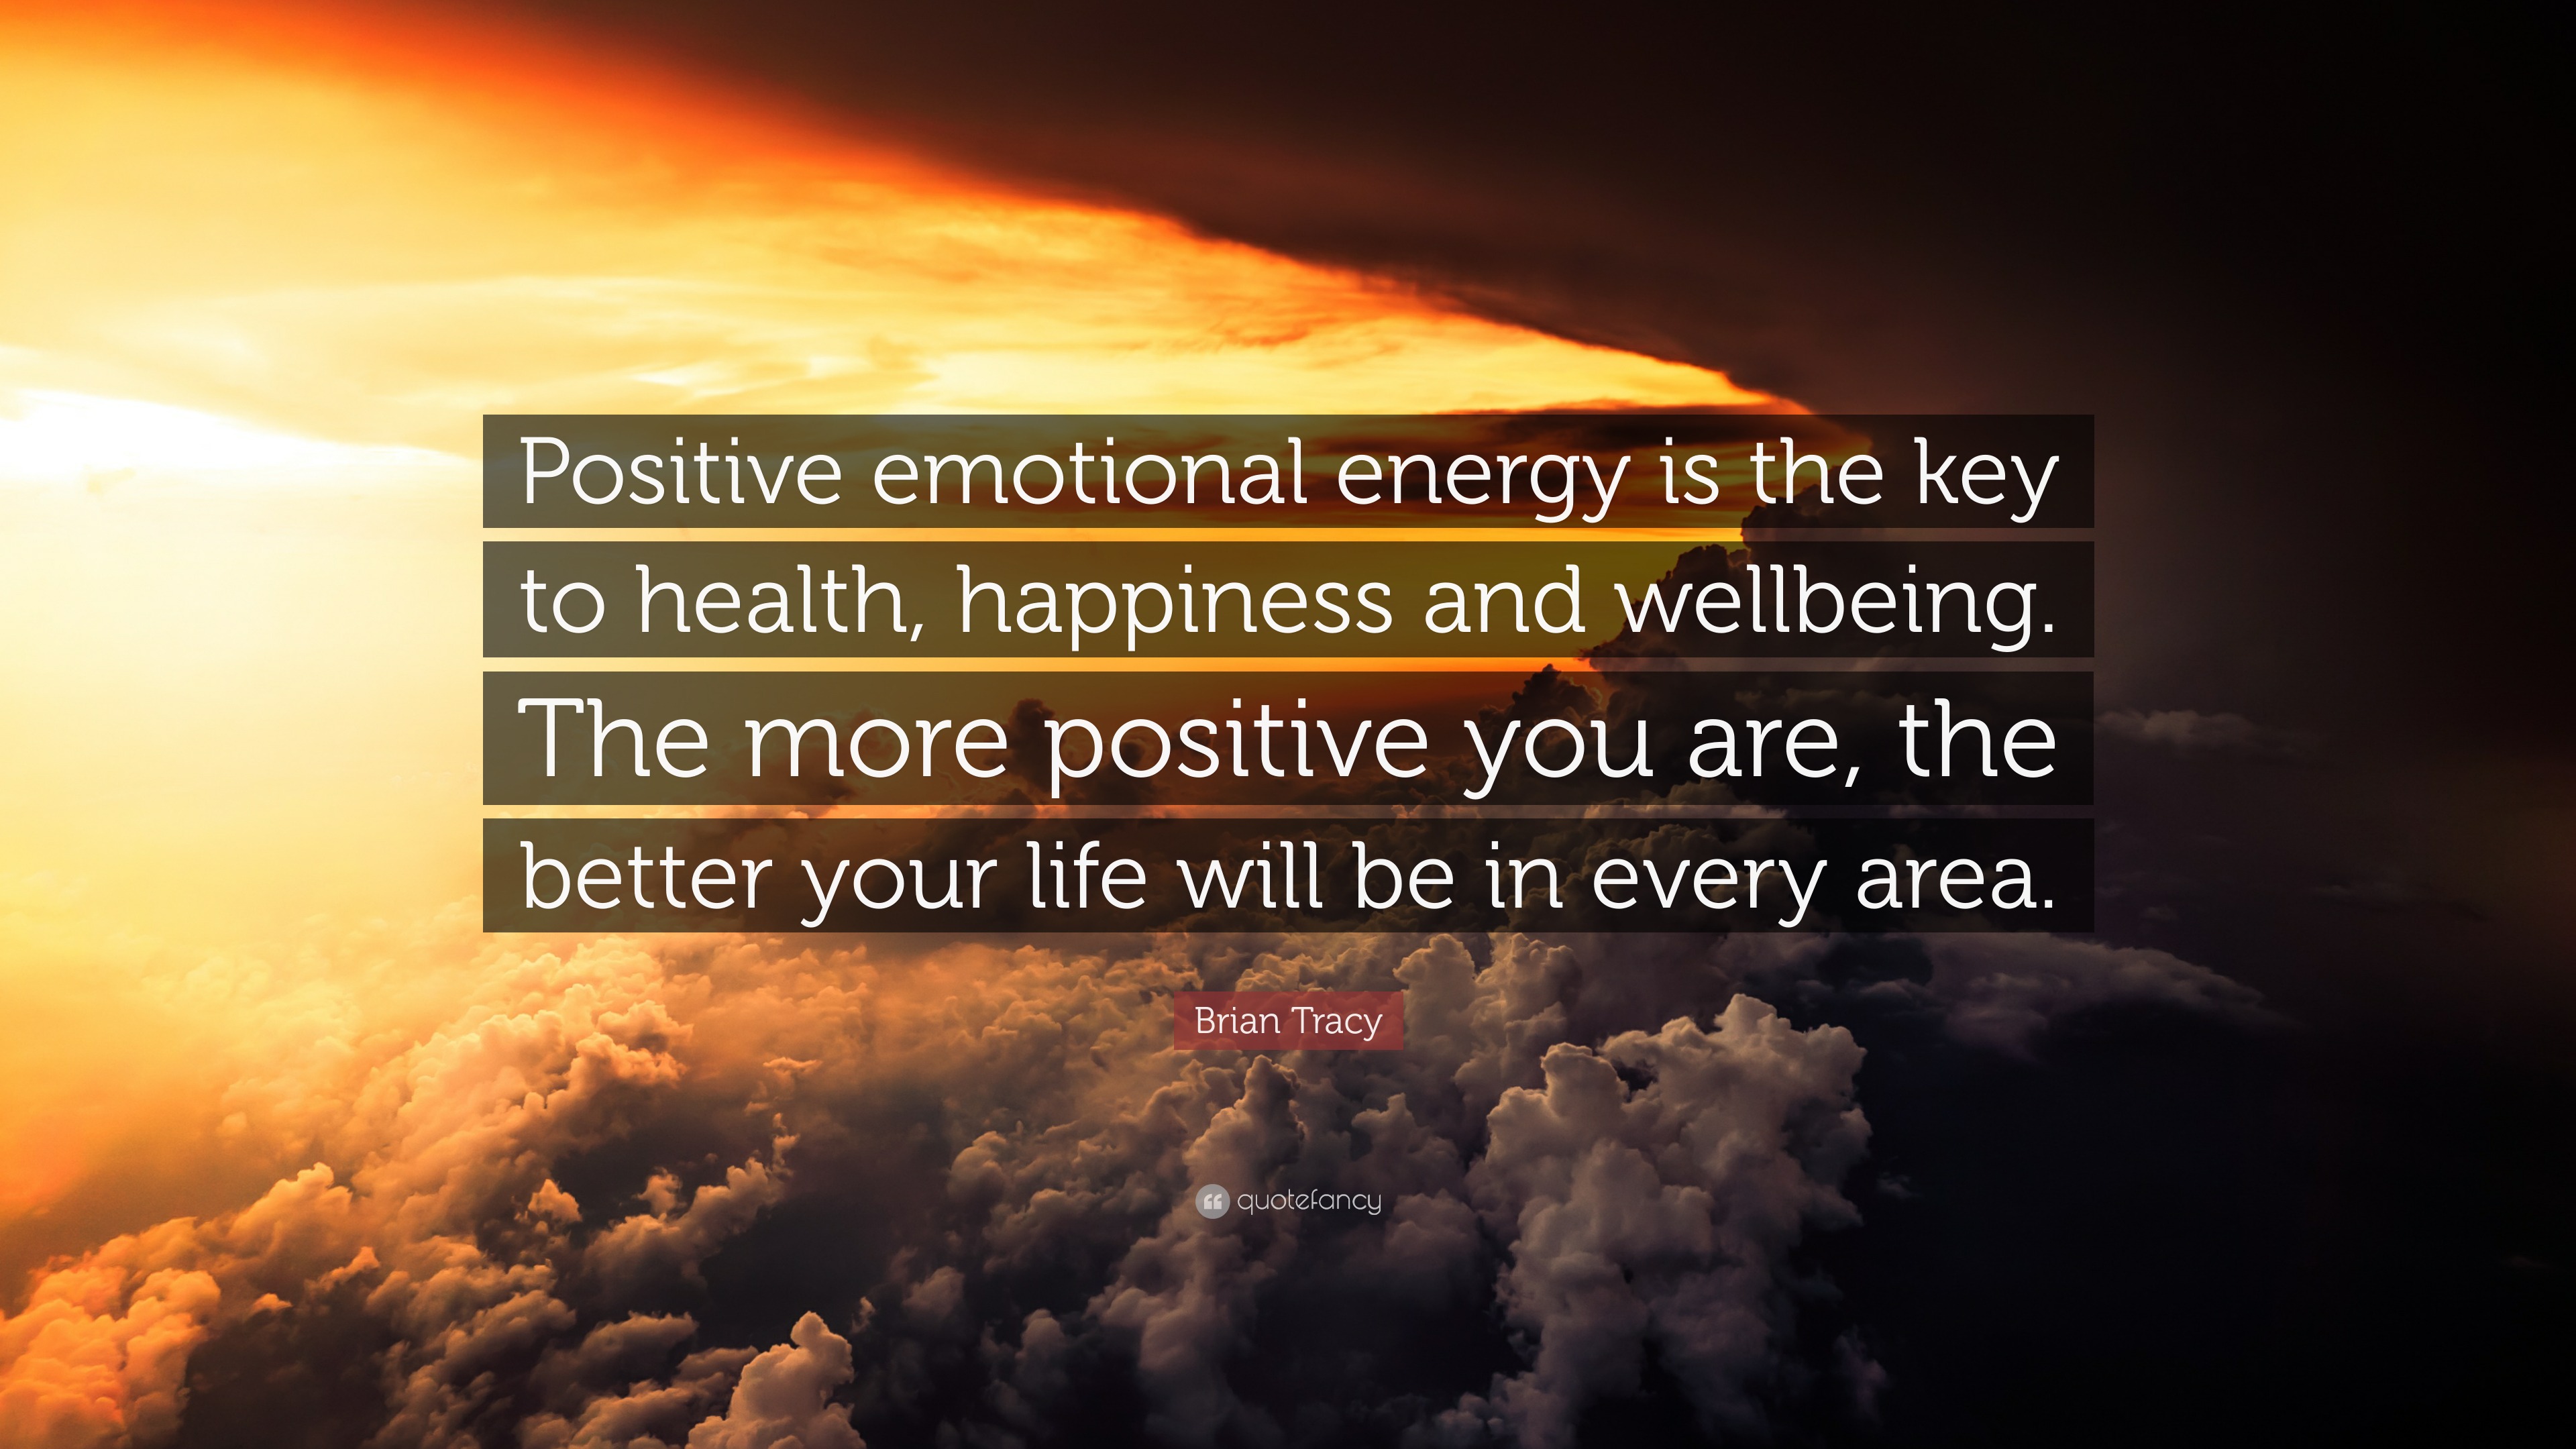 Brian Tracy Quote: “Positive emotional energy is the key to health